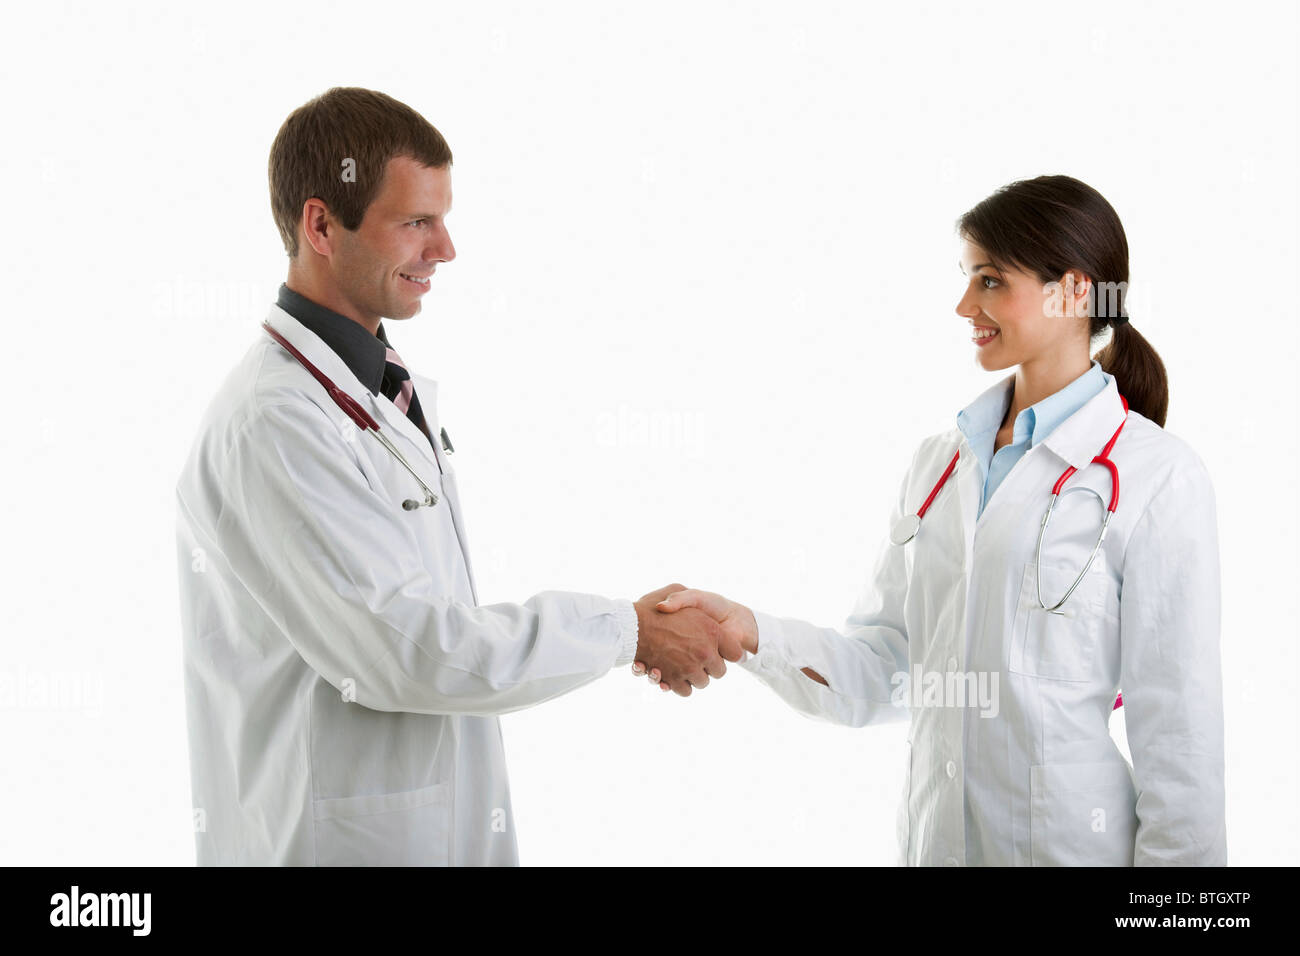 Two doctors shaking hands Stock Photo